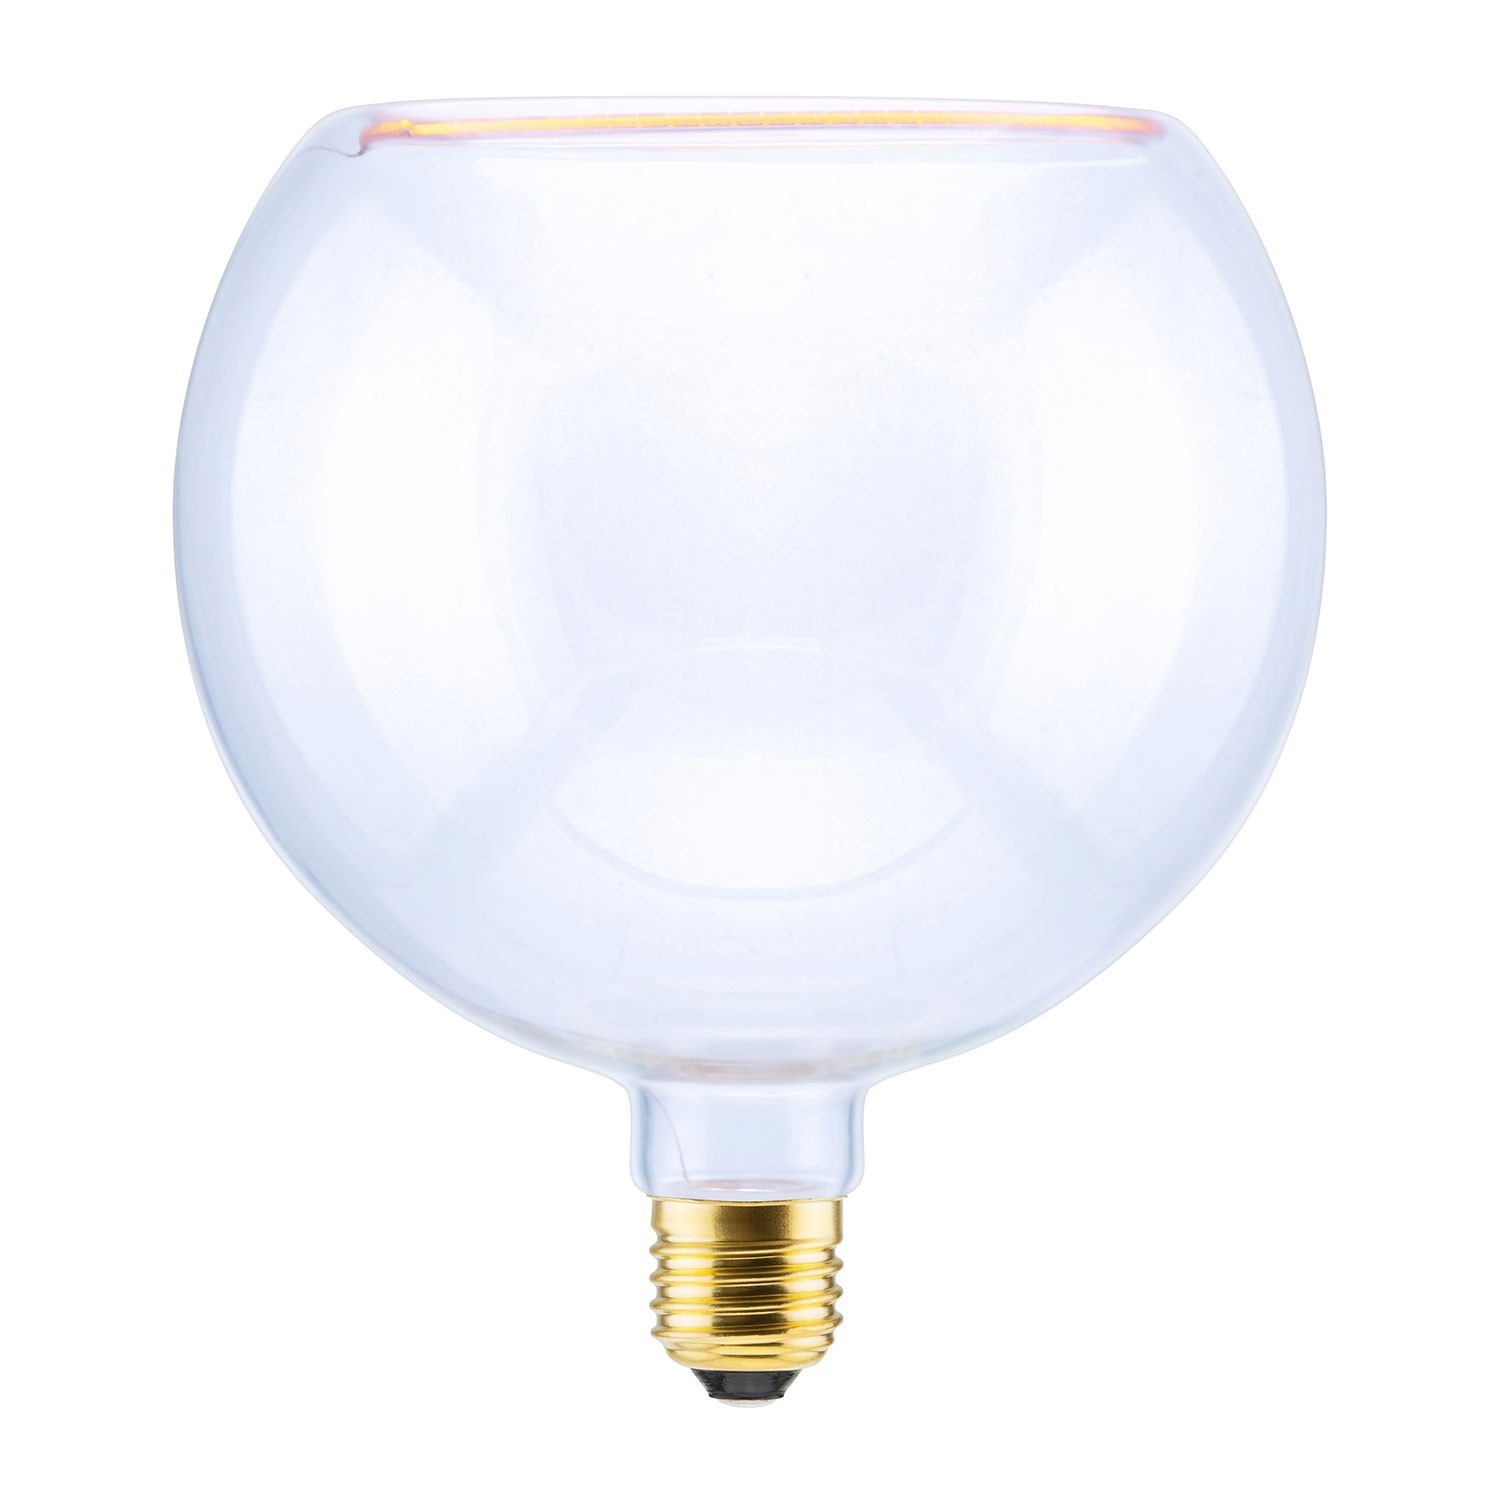 LED Globe G200 Clear Light Bulb Floating Collection 6W 330Lm 1900K Dimmable